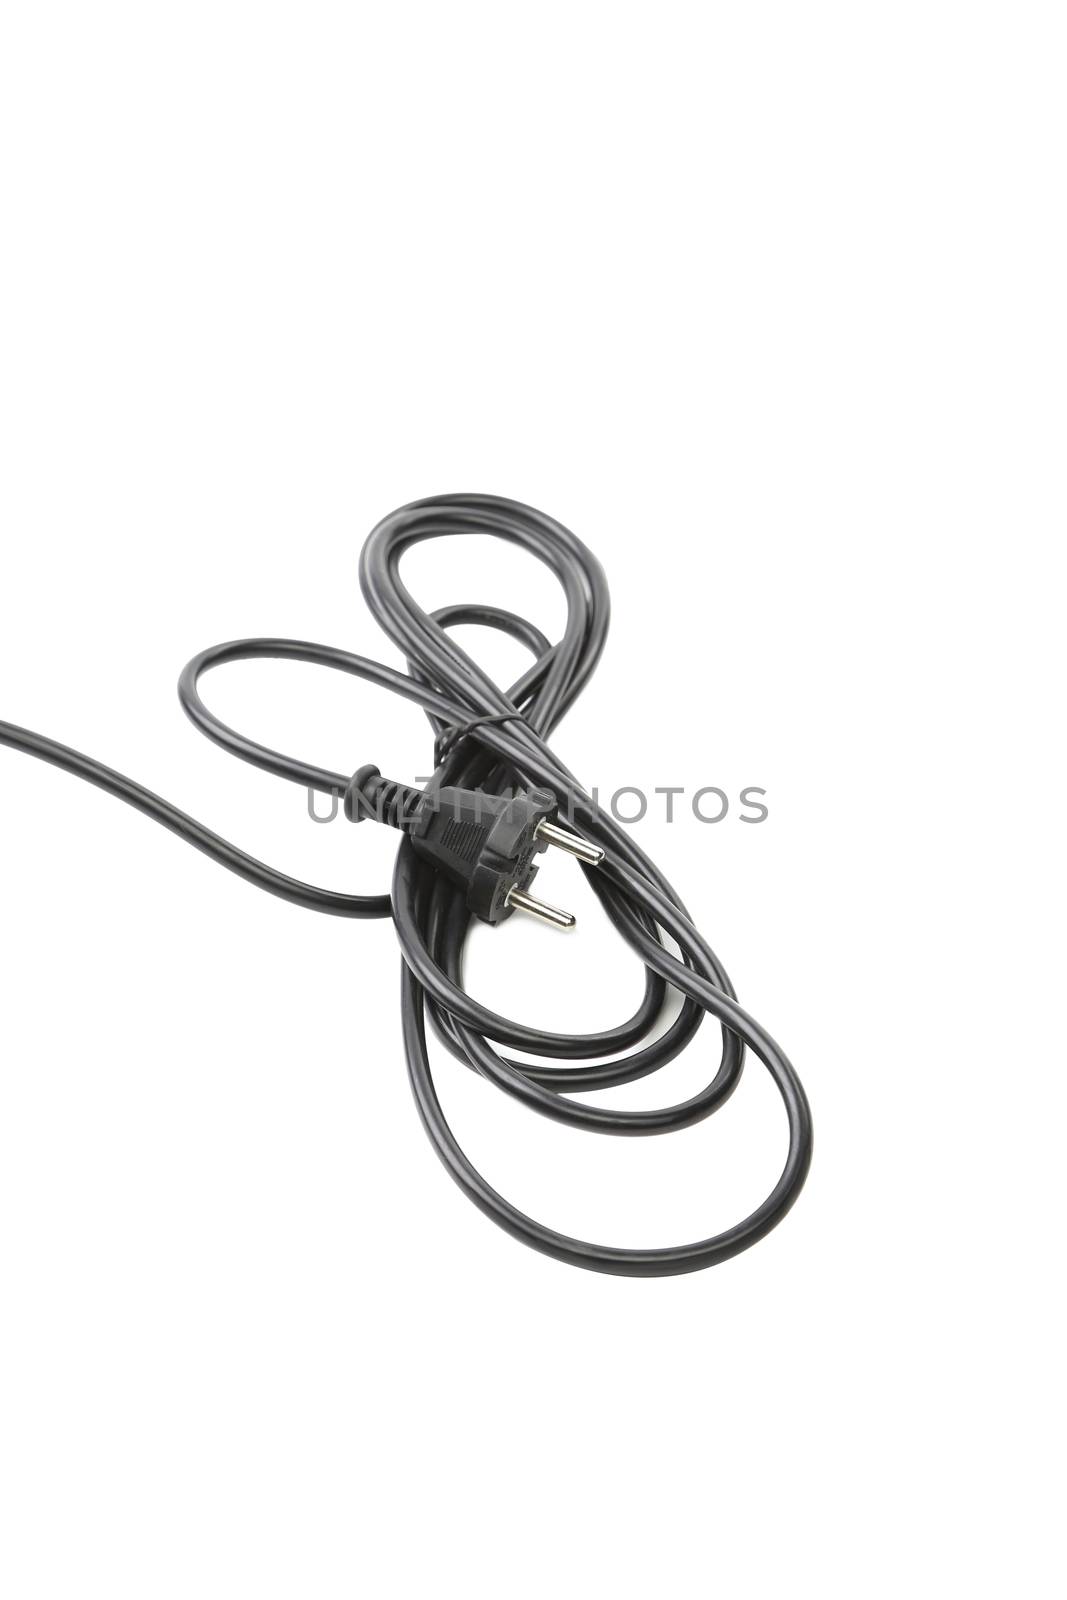 Plug of power supply "230V". Isolated on a white background.